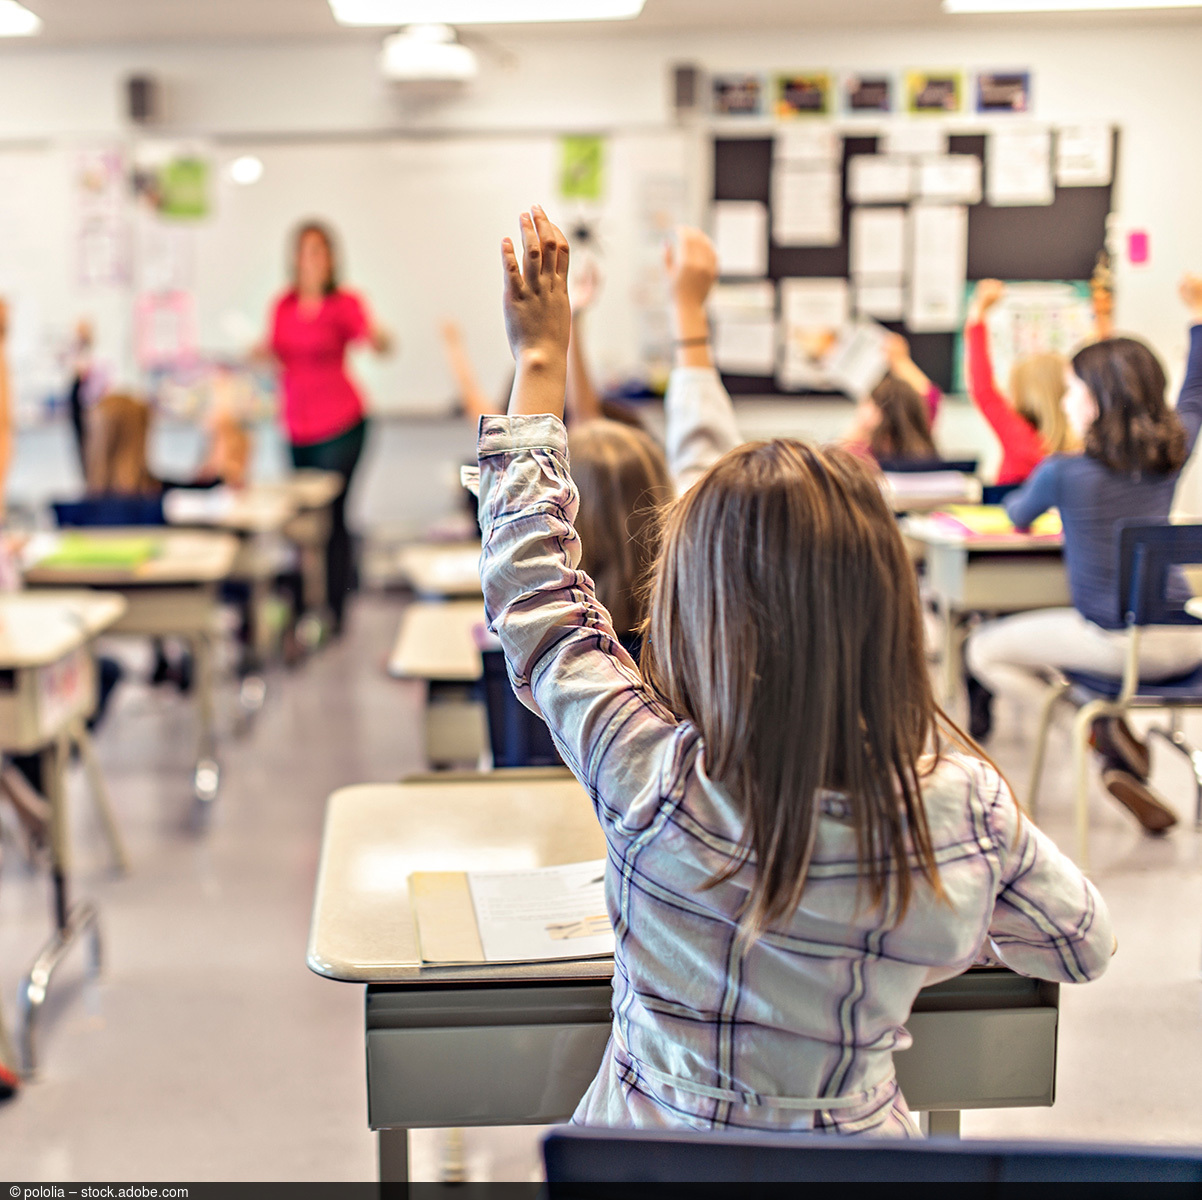 Children are taught in a classroom and raise their hand.